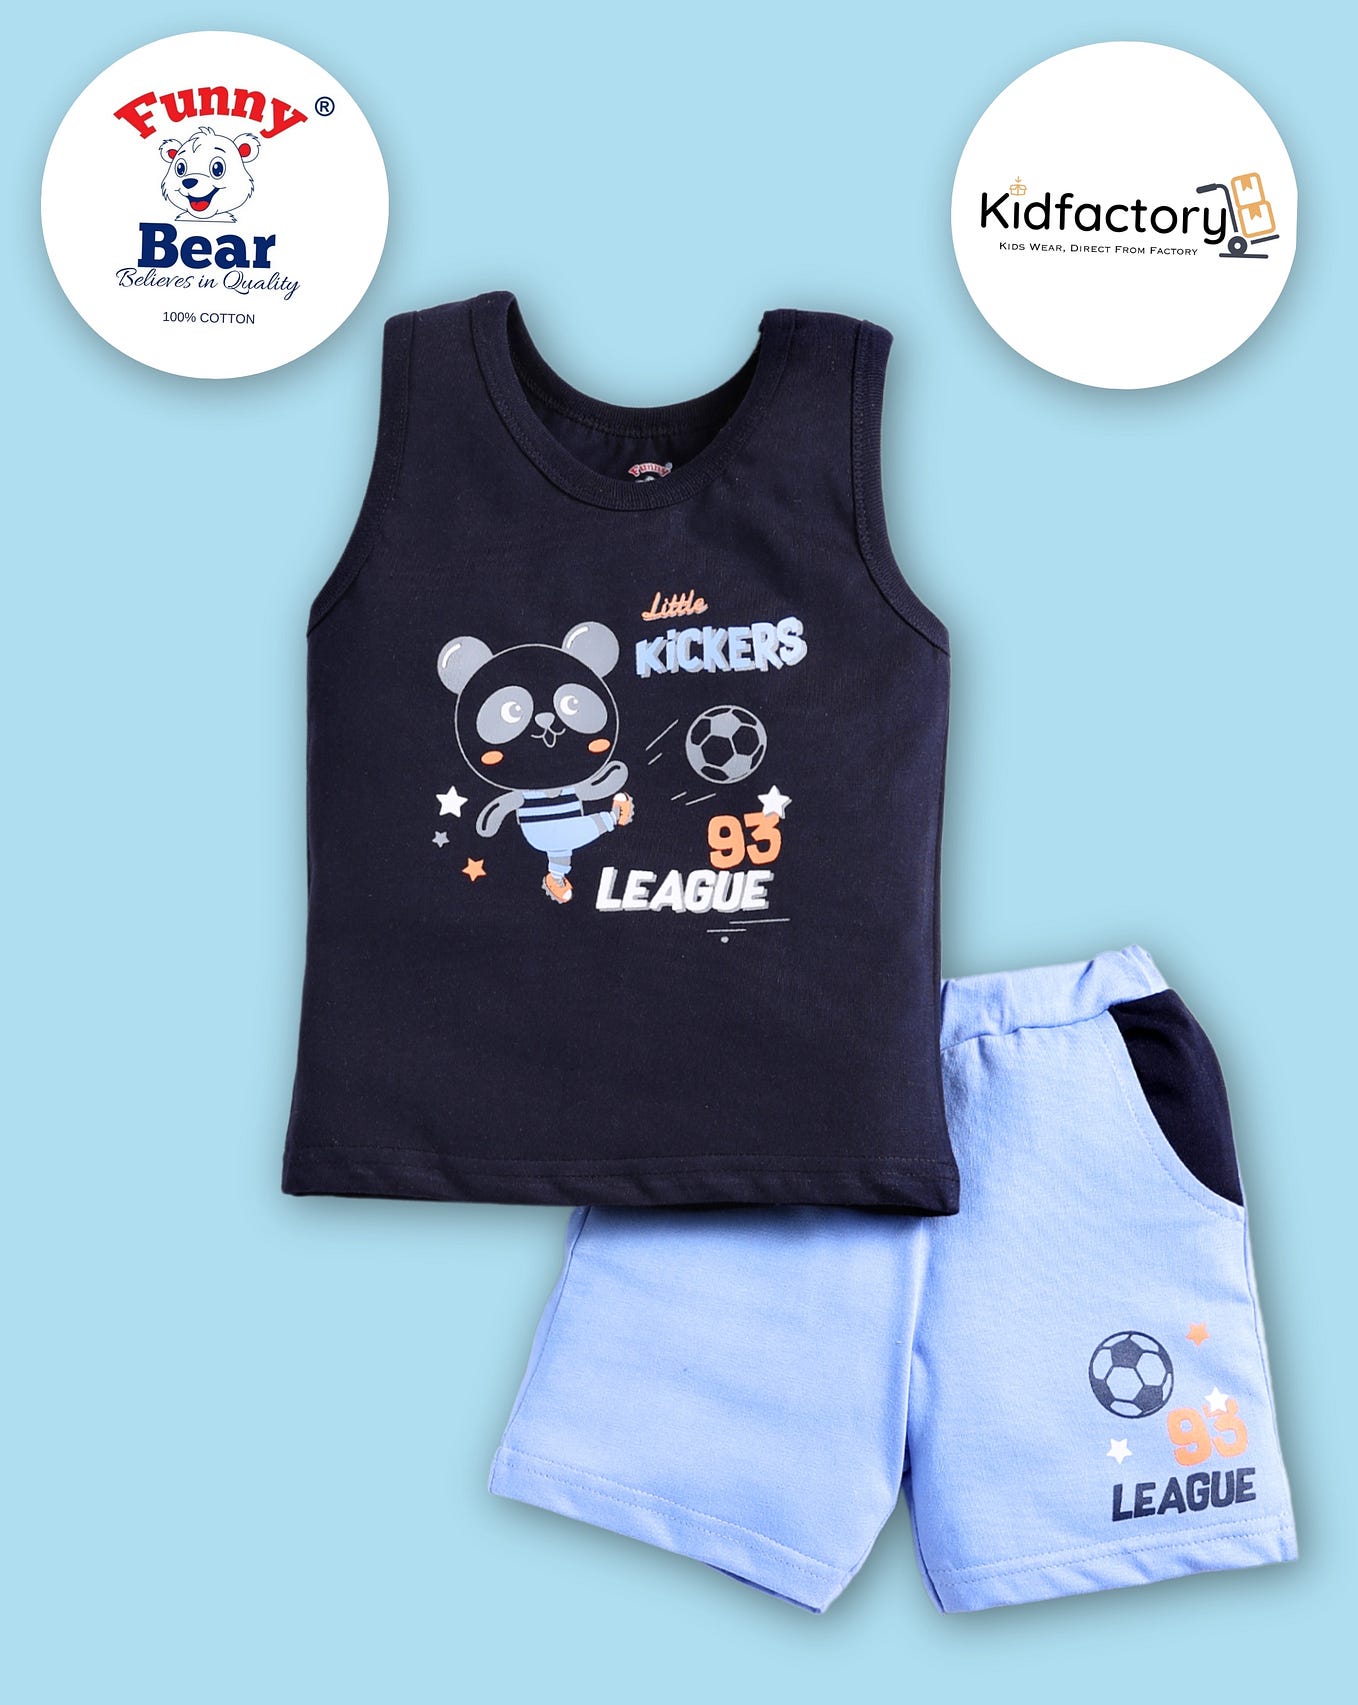 Best wholesale baby clothes in Uttarakhand | kidfactory.in - Kidfactory ...